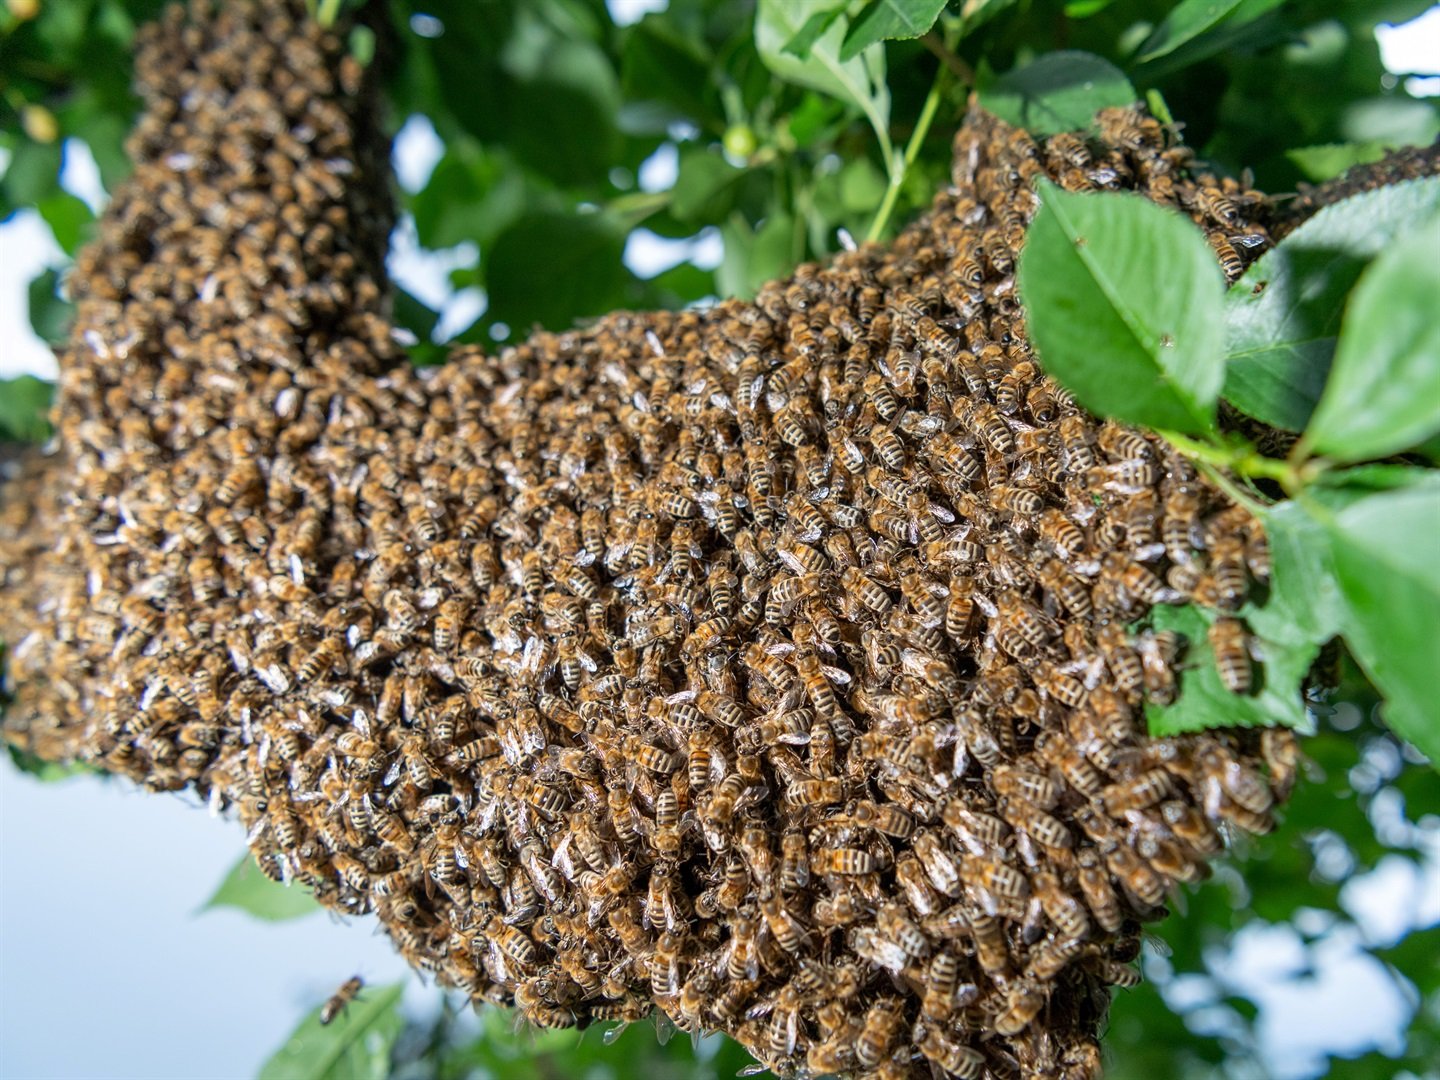 Nkosentsha Njimbana died after he was stung to death by a swarm of bees.